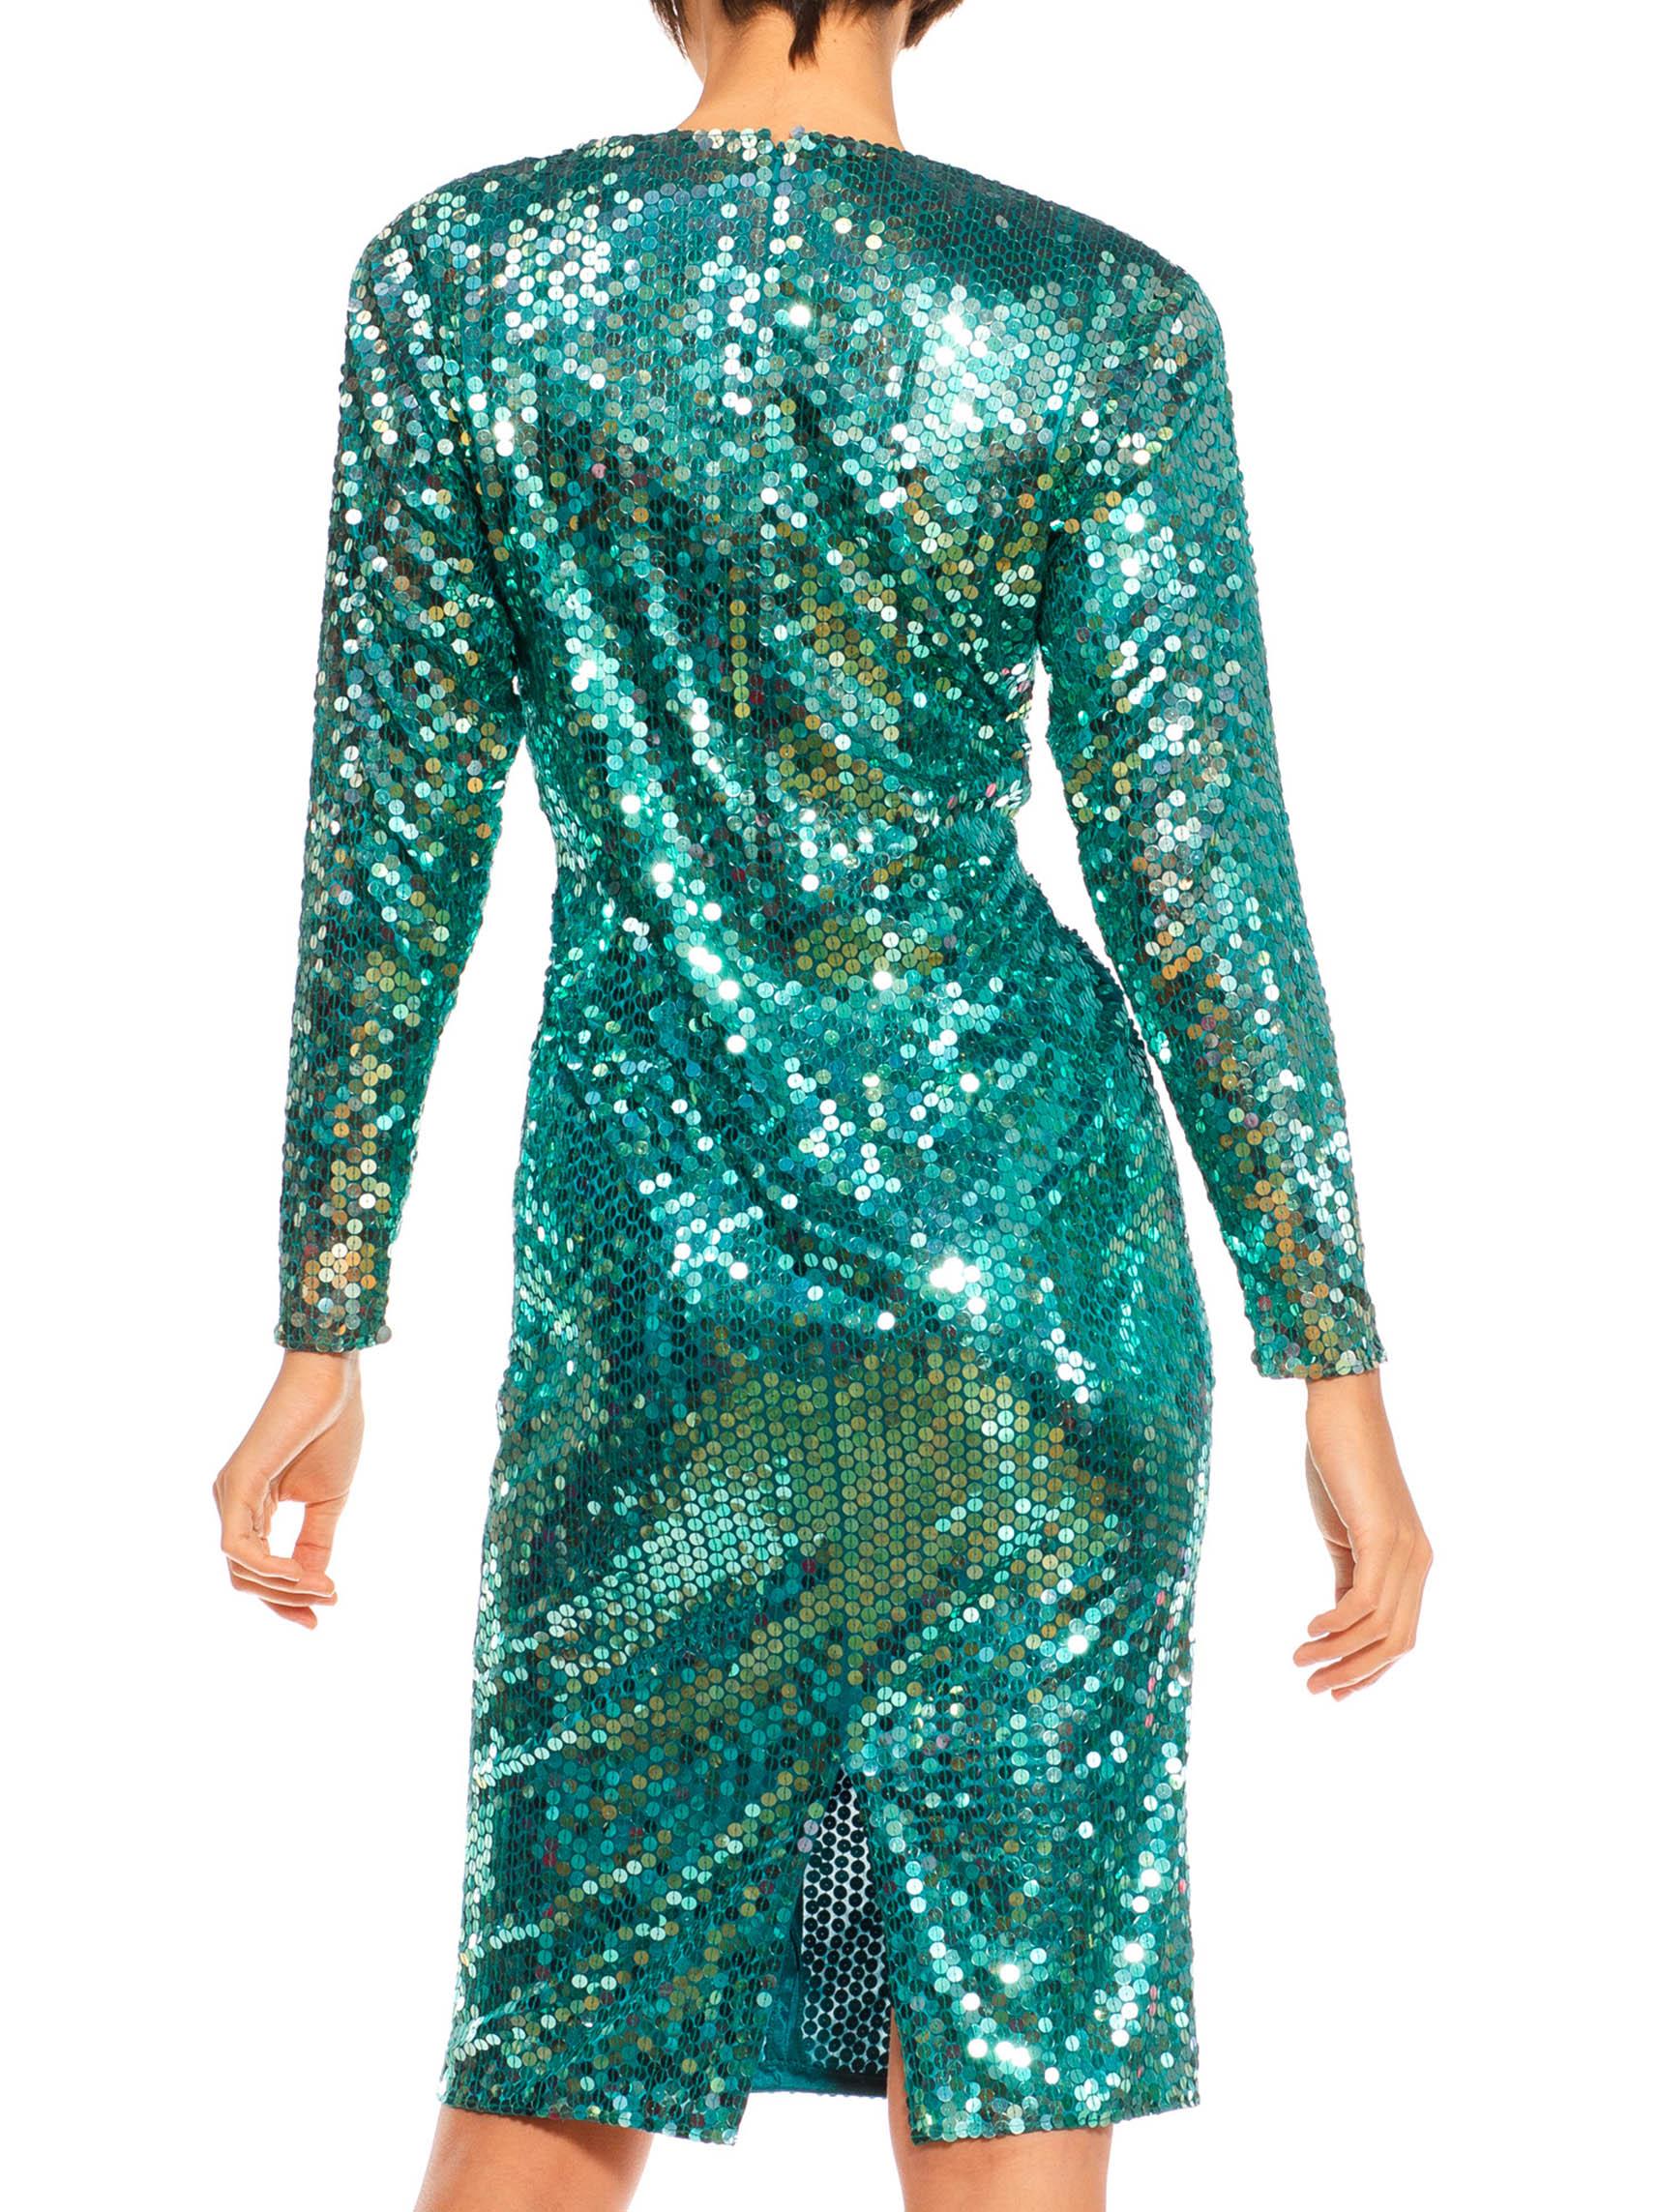 1980S Teal Sequined Poly/Viscose Jersey Low Cut & Long Sleeved Cocktail Dress For Sale 1